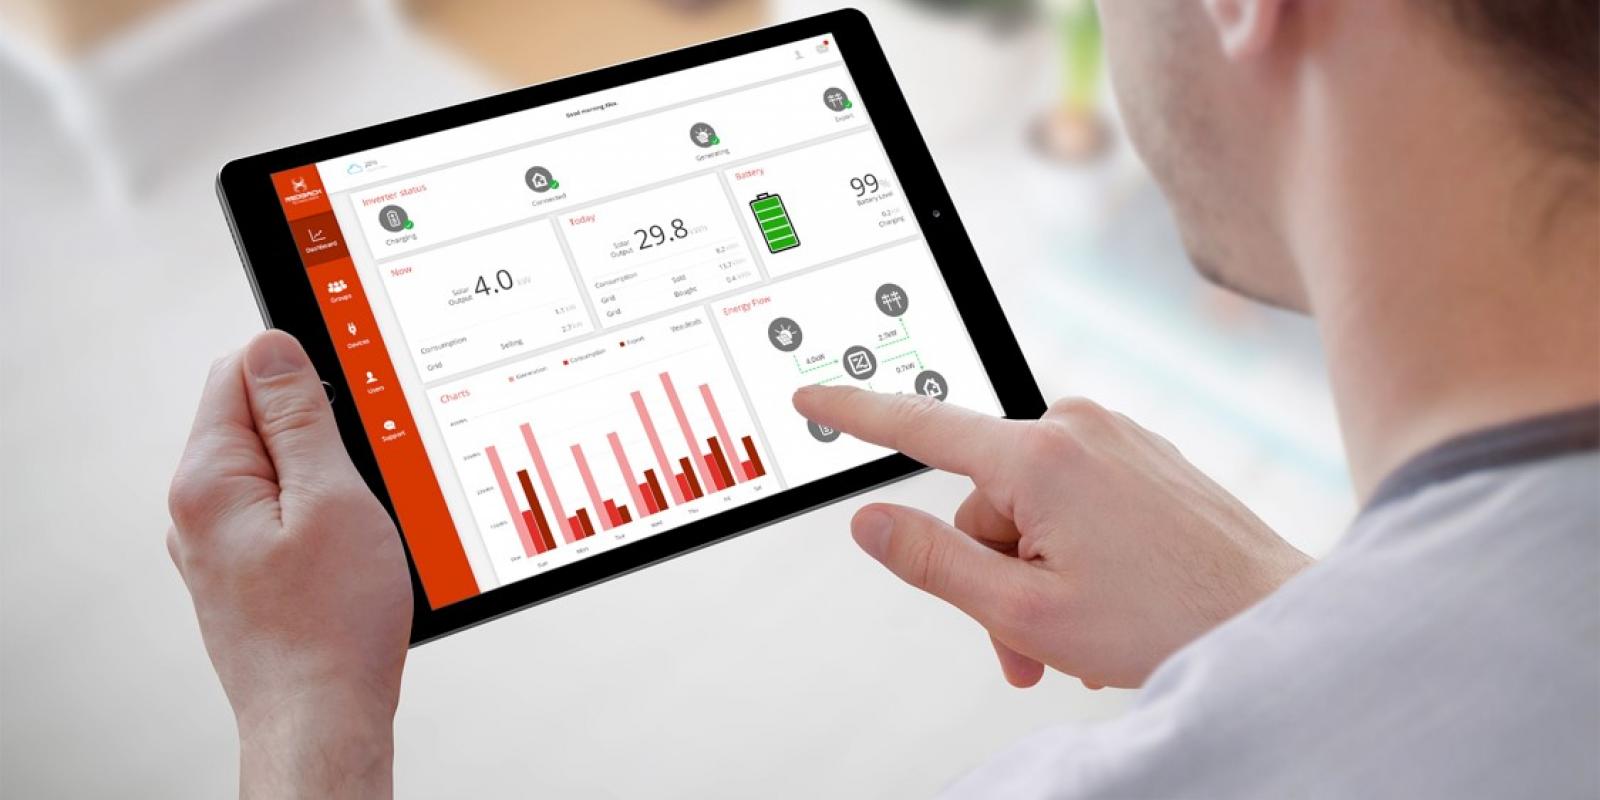 EnergyAustralia's energy management software allows customers to remotely manage their load and appliances flexibly and efficiently